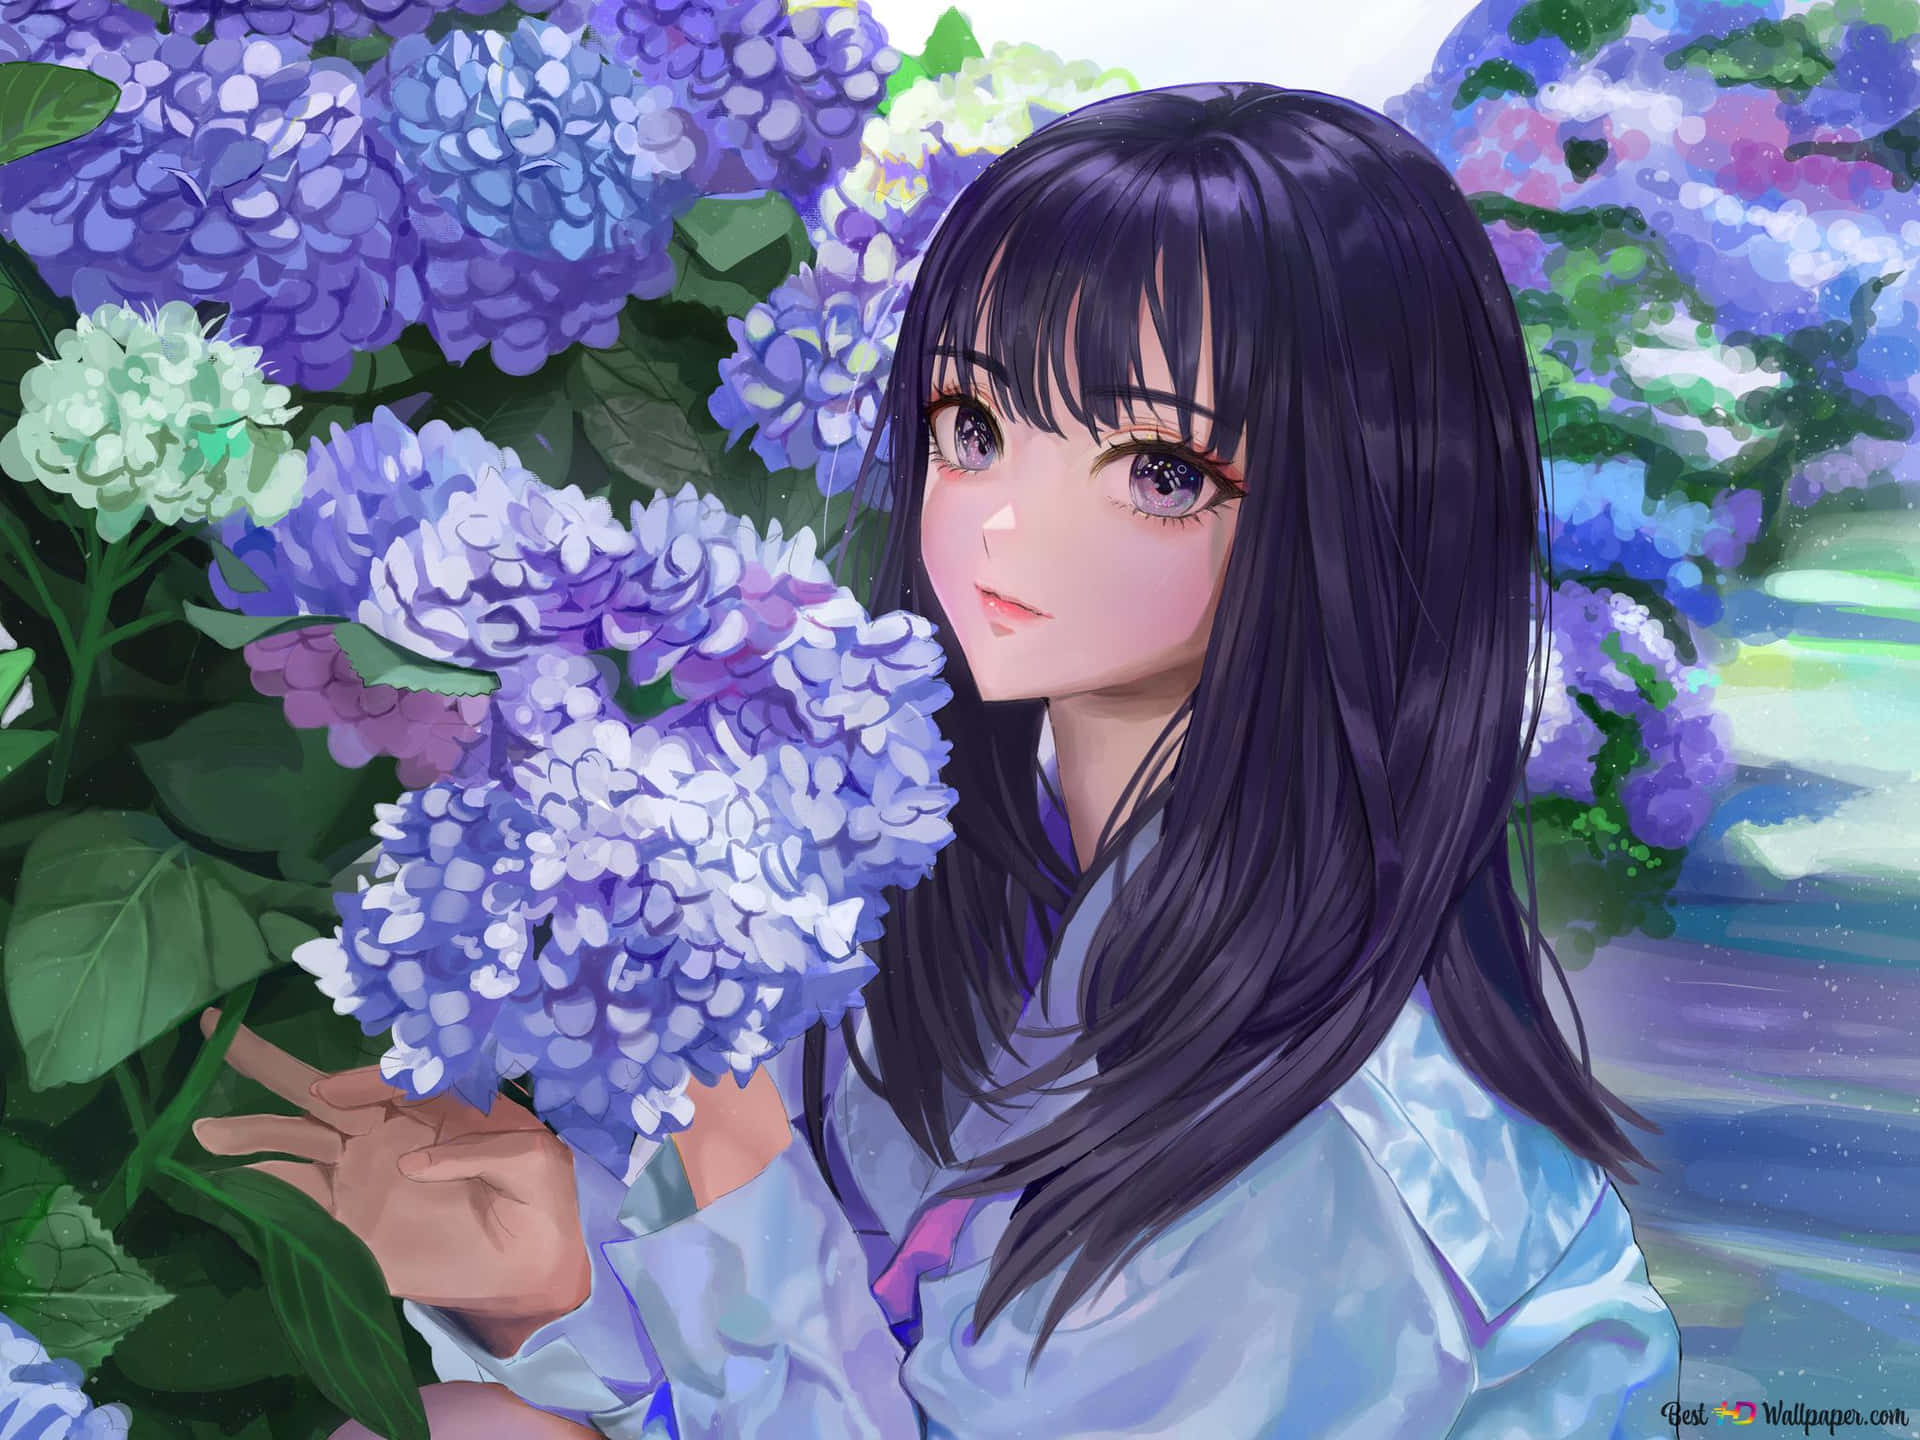 Anime Flowers Png Png Collections At Sccpre  Anime Flowers Png  Transparent Png  Transparent Png Image  PNGitem